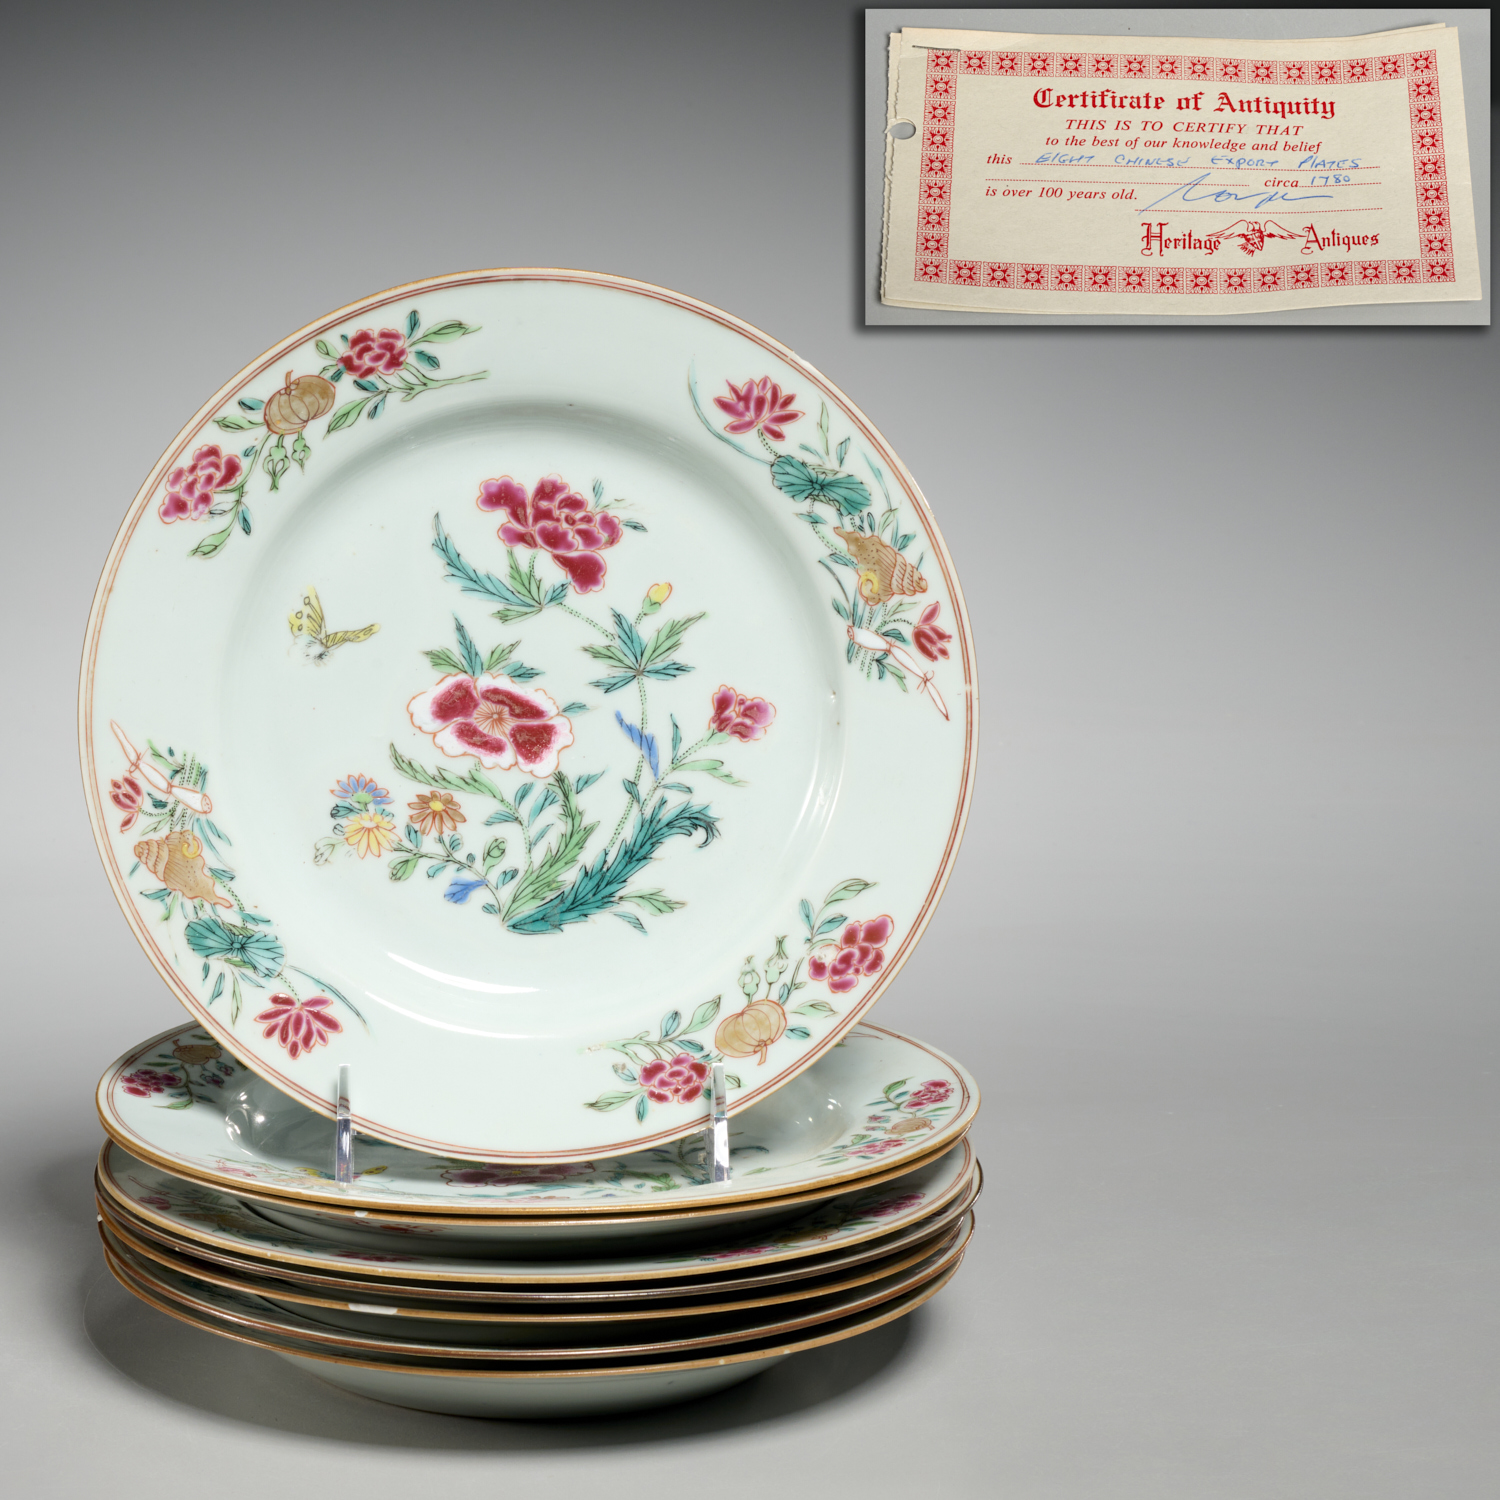 SET (8) CHINESE EXPORT PLATES, C. 1780